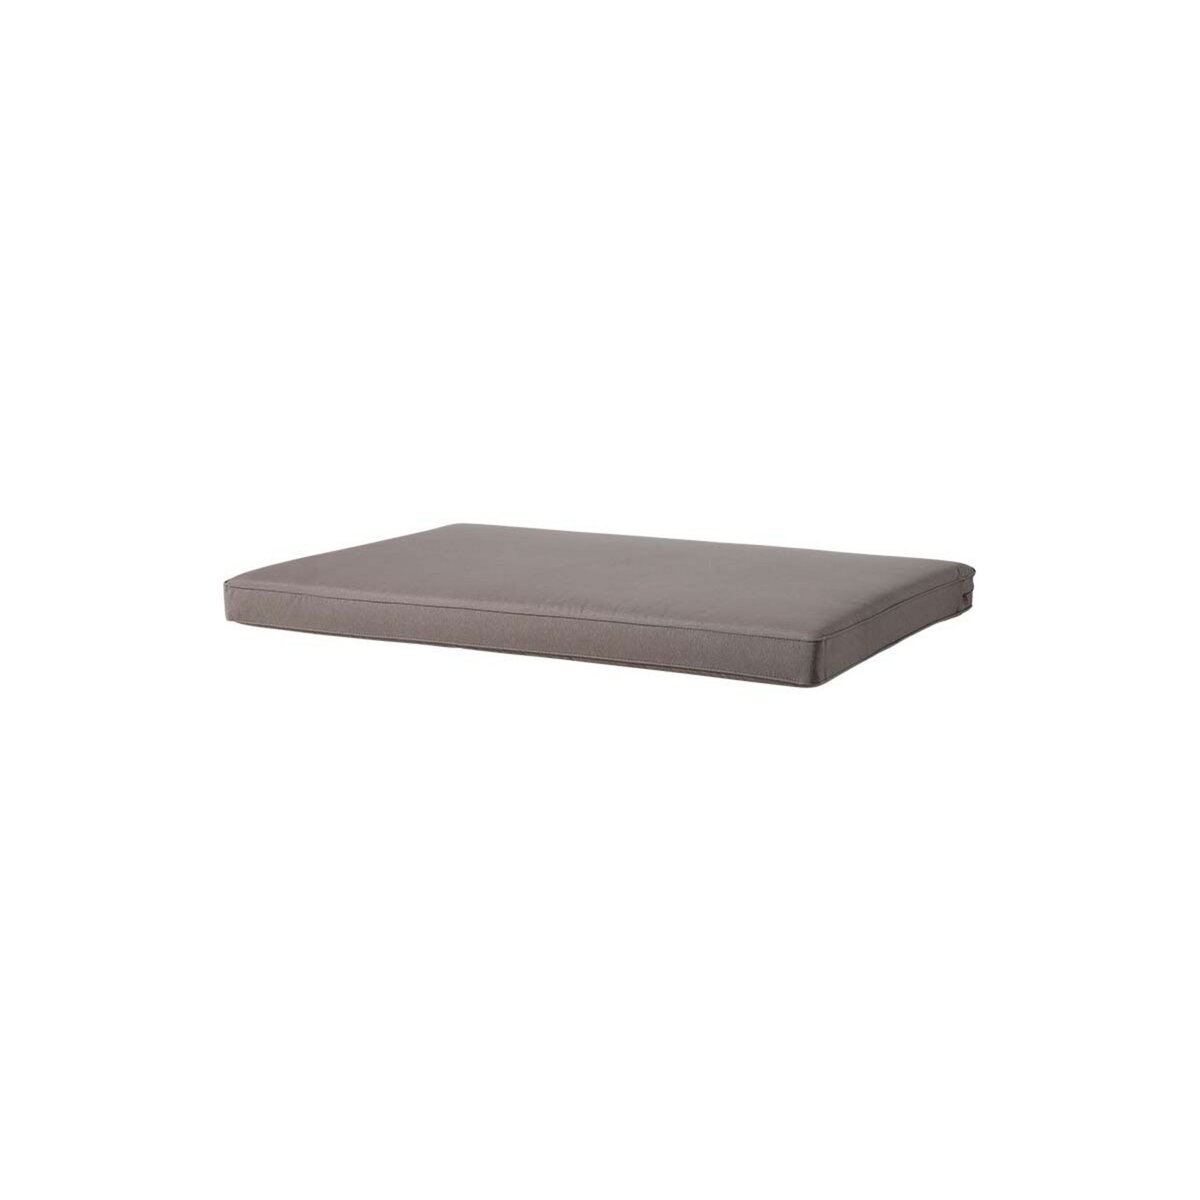 MADISON Coussin palette assise Panama Taupe 120 x 80 cm